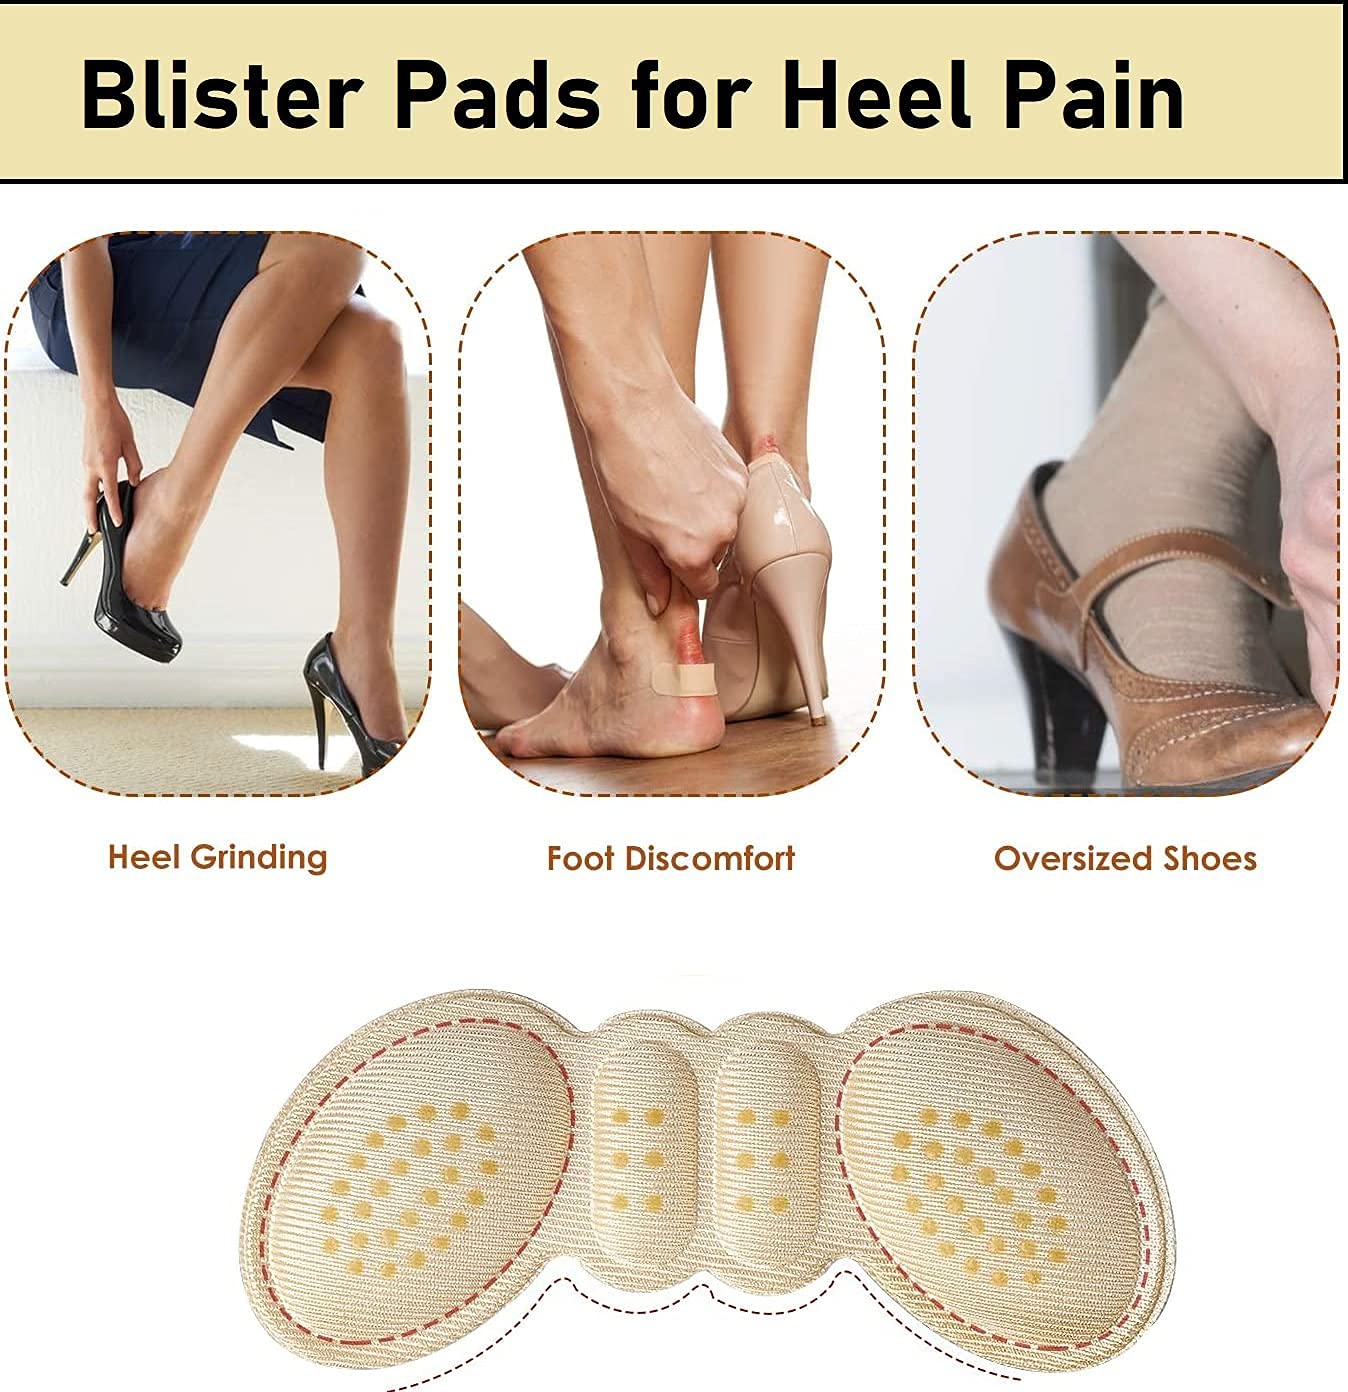 Amazon.com: High Heel Inserts-Ball of Foot Cushion Prevent Foot from  Sliding Foward,Adhesive Forefoot Metatarsal Pads for Women Relief Blister  Callus Pain,Lambskin Non-Slip Shoe Insoles for Pumps Boots Flats : Health &  Household